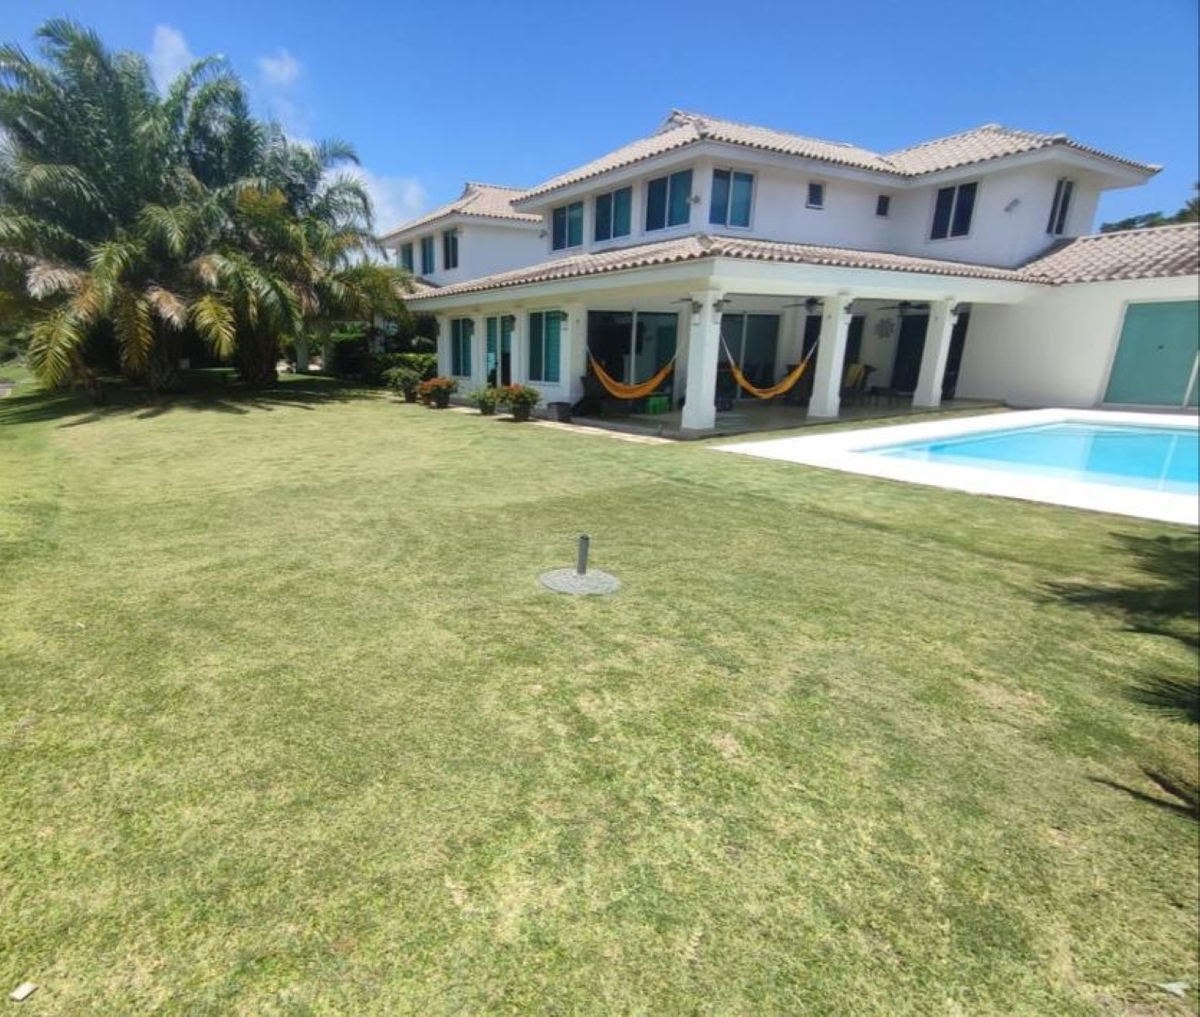 FAMILY HOME FOR RENT IN BIJAO GOLF, BEACH CLUB AND RESORT.